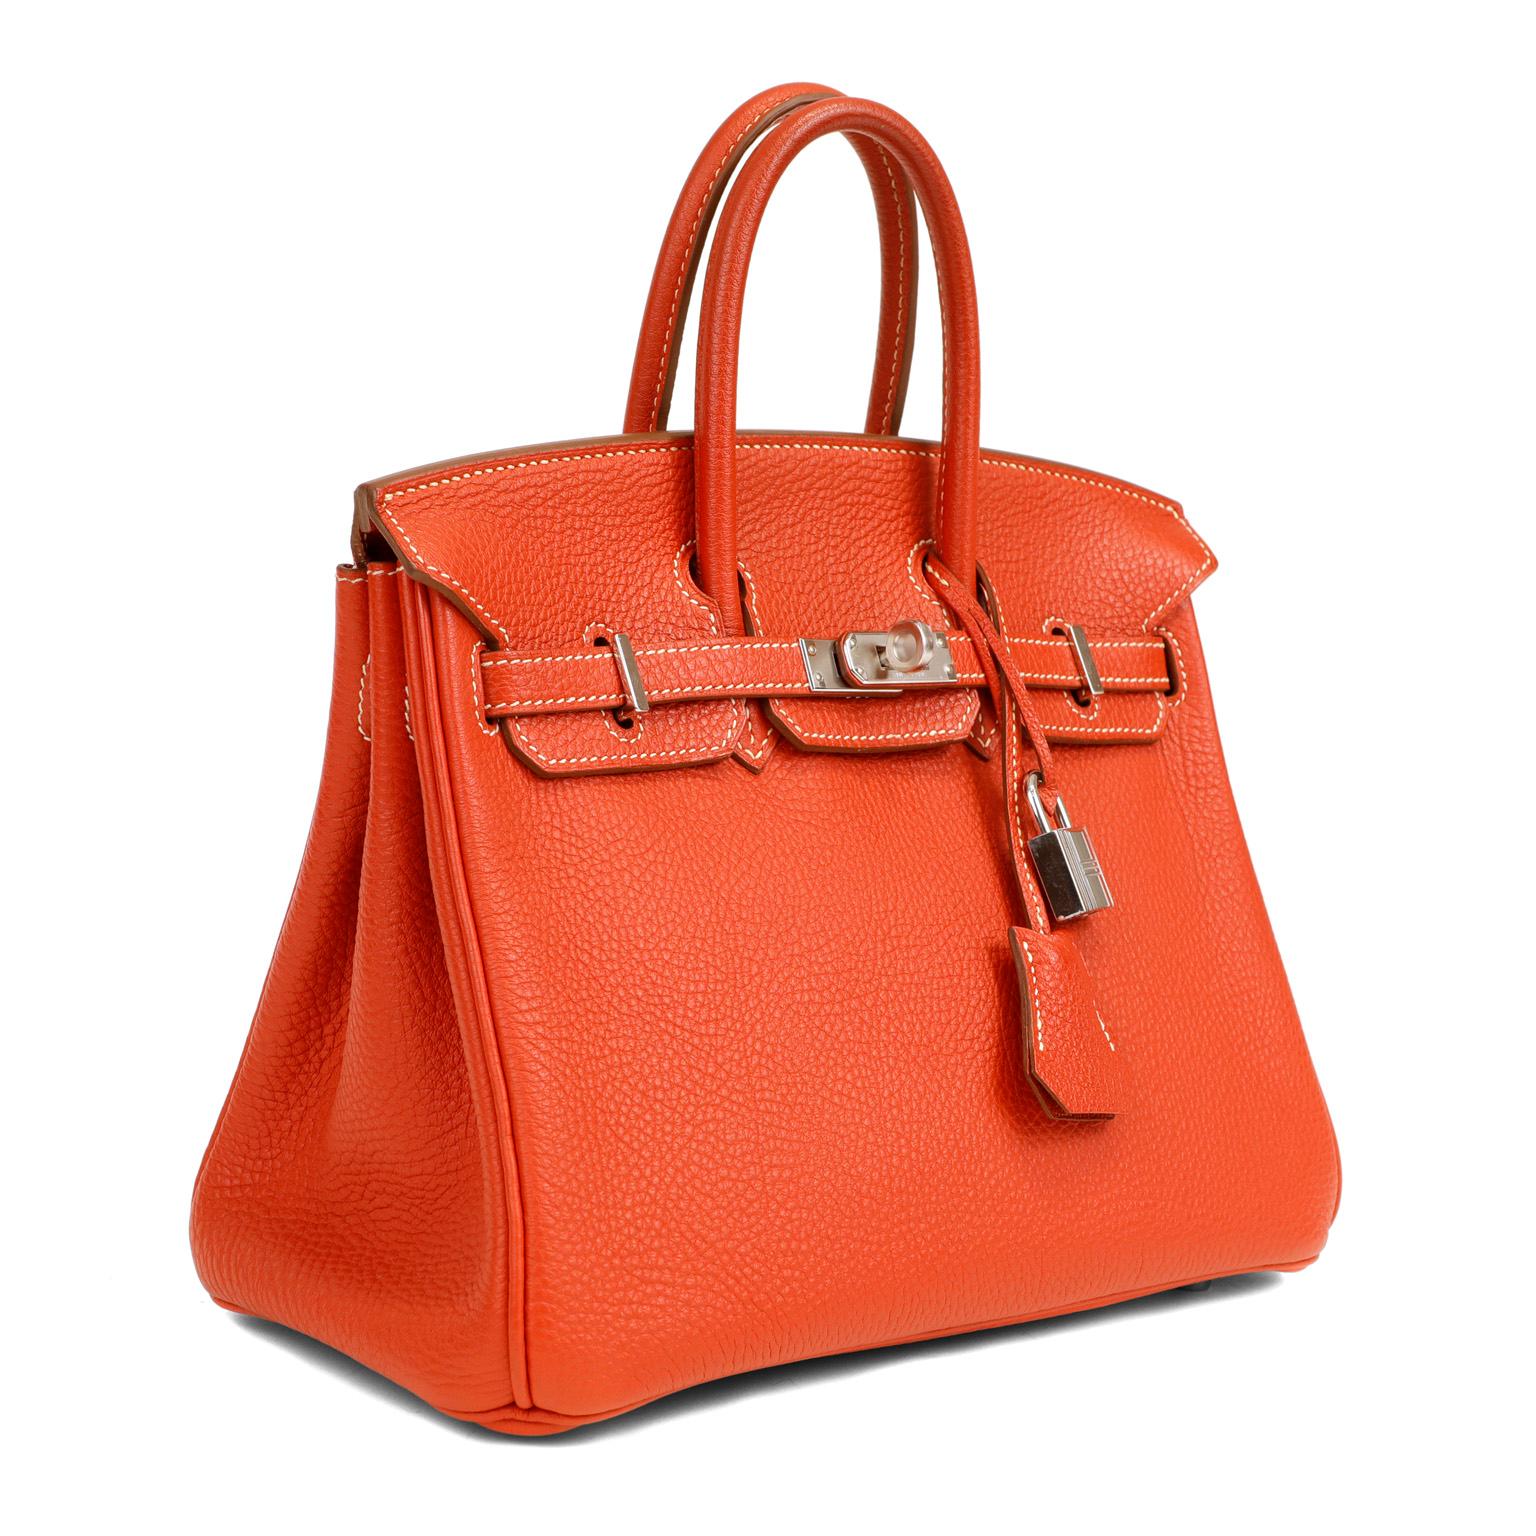 This authentic Hermès Tomato Red 25 cm Birkin is in pristine condition with the protective plastic on much of the hardware.   Hand stitched by skilled craftsmen, wait lists of a year or more are common for the Hermès Birkin. They are considered the